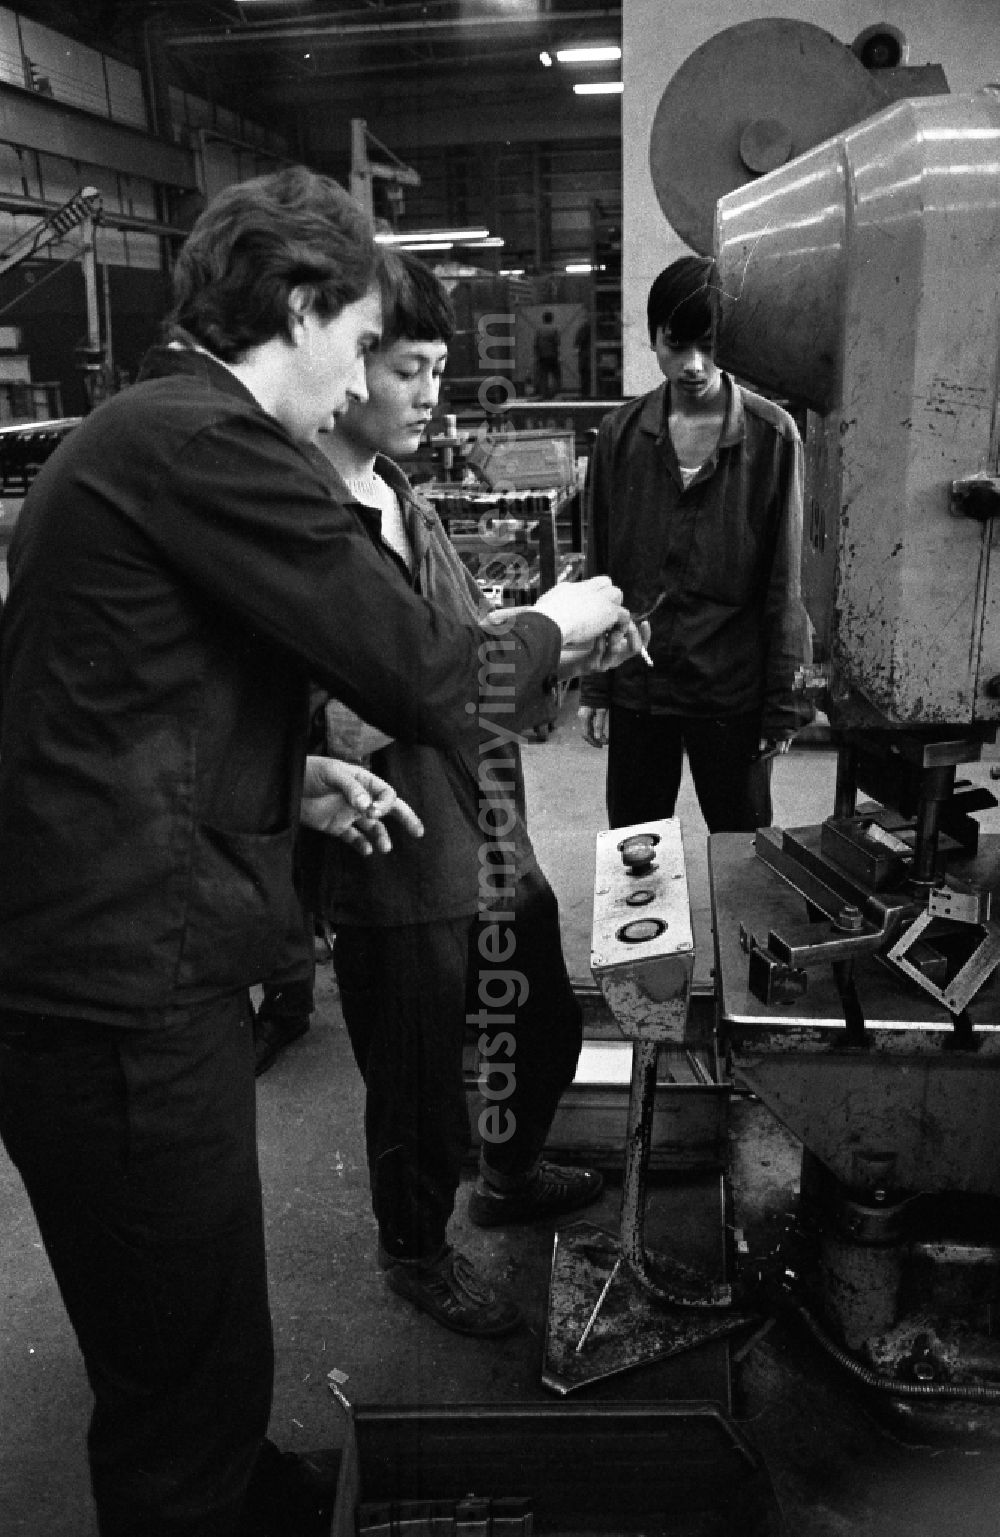 GDR photo archive: Berlin - Vietnamese contract workers and temporary workers in production at VEB Elektroprojekt und Anlagenbau EAB in the district on street Rhinstrasse of Marzahn in Berlin East Berlin on the territory of the former GDR, German Democratic Republic